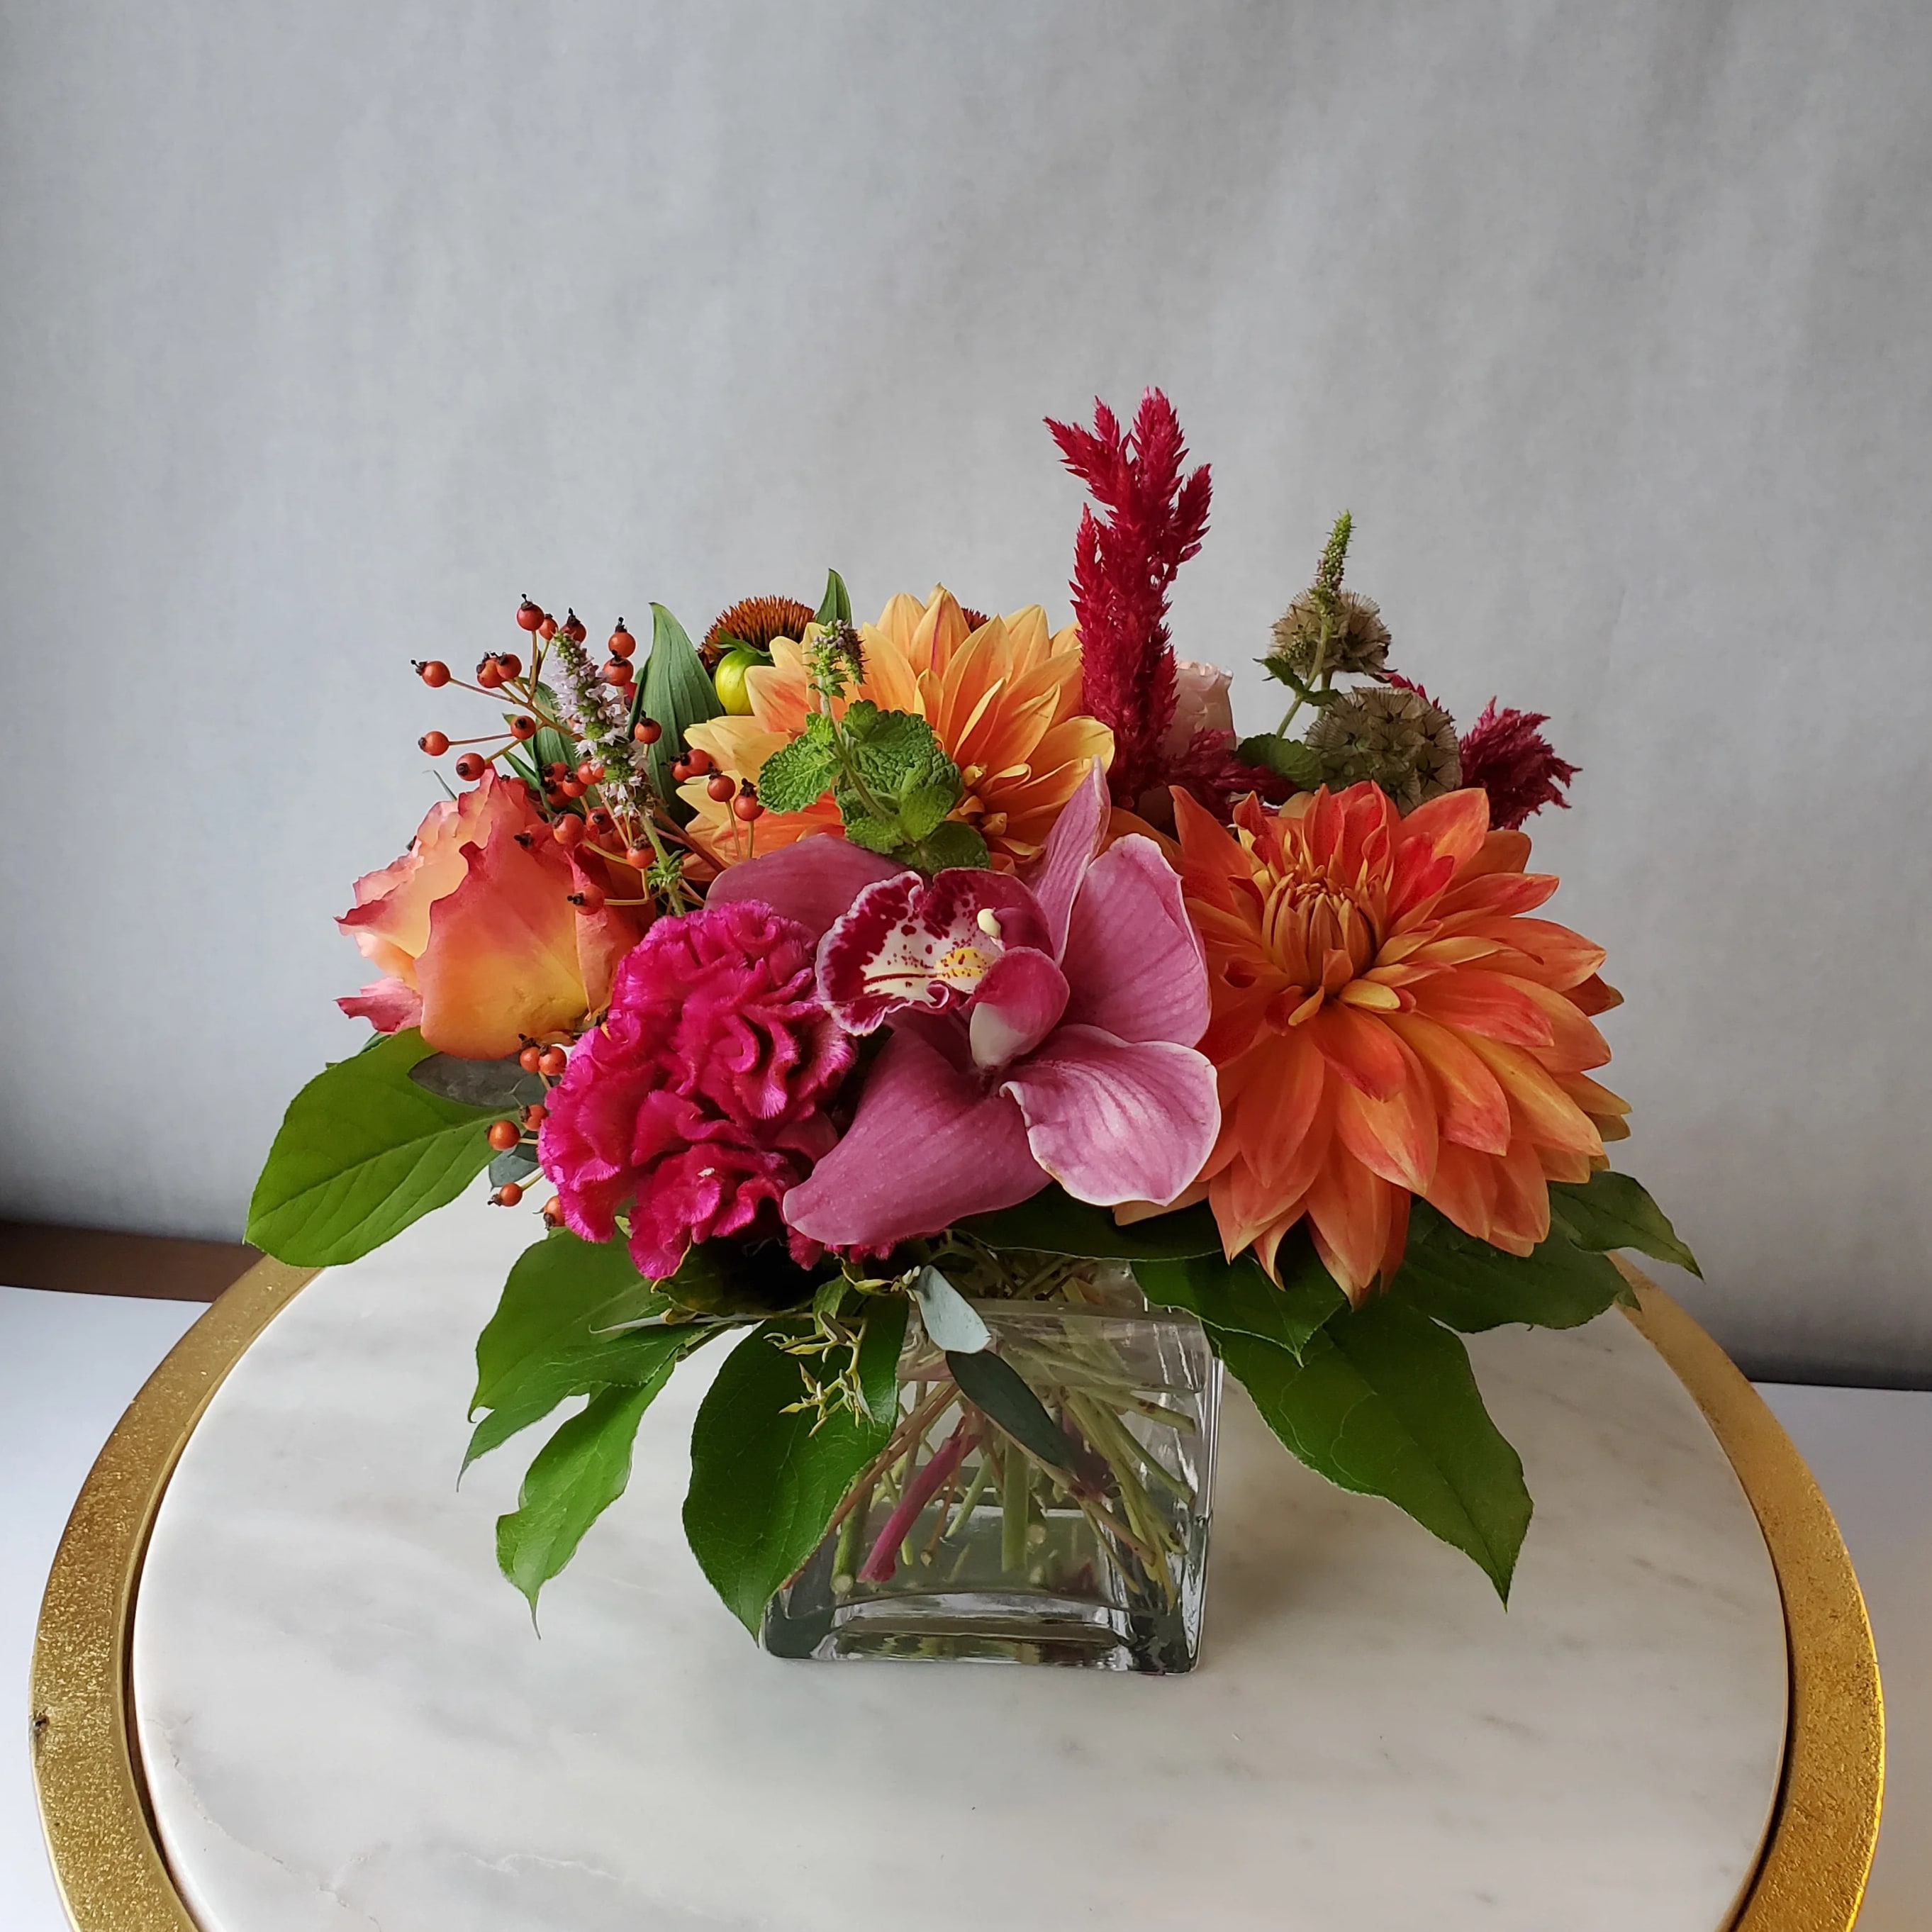 Dazzling Delight - Delight someone special, including yourself, today! By combining a vibrant mix of fiery reds, hot pinks, and bold oranges with the freshest seasonal flowers, this arrangement is sure to dazzle anyone.